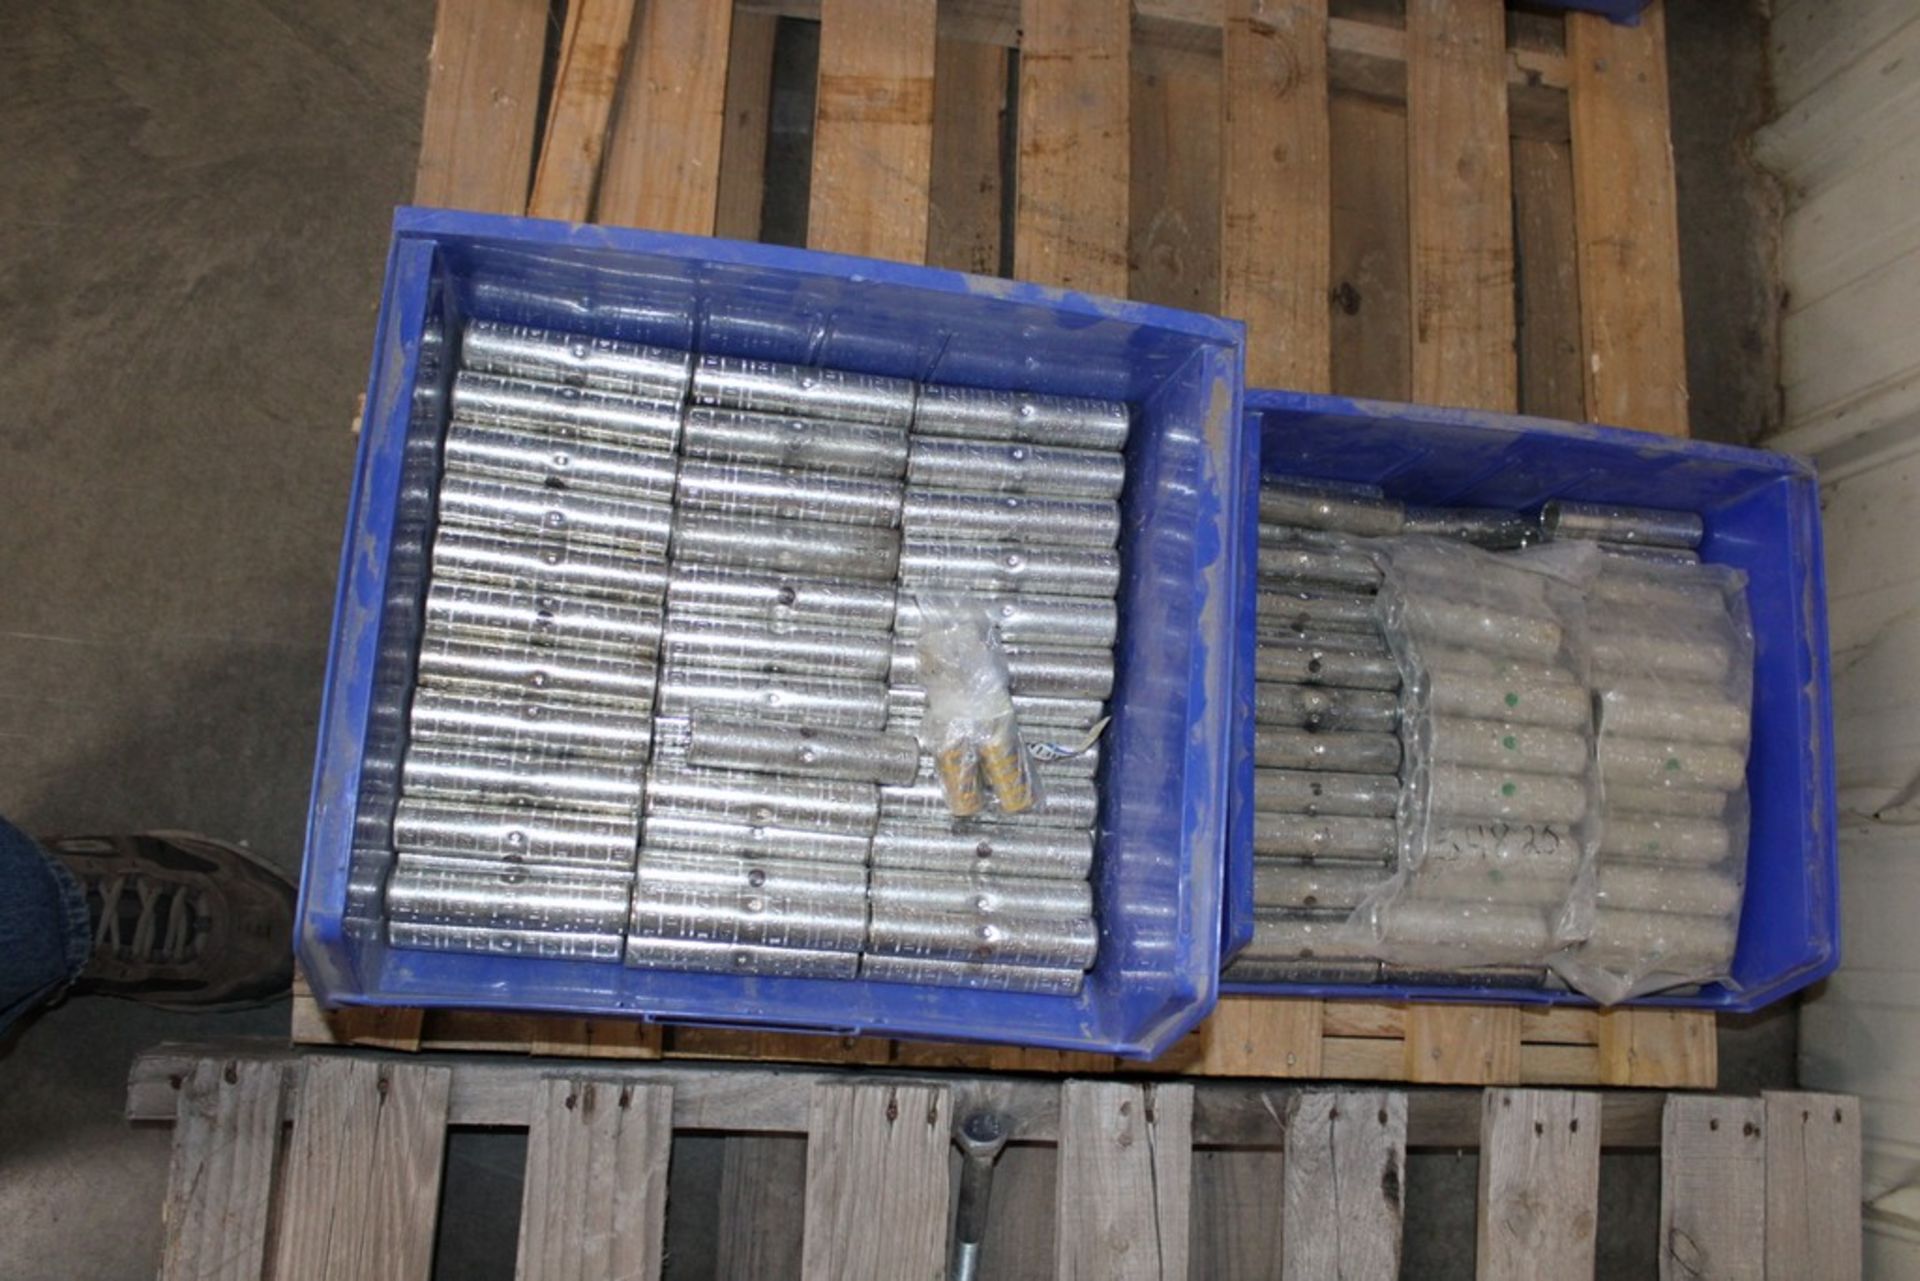 ASSORTED ELECTRICAL LUGS ON PALLET - Image 3 of 3